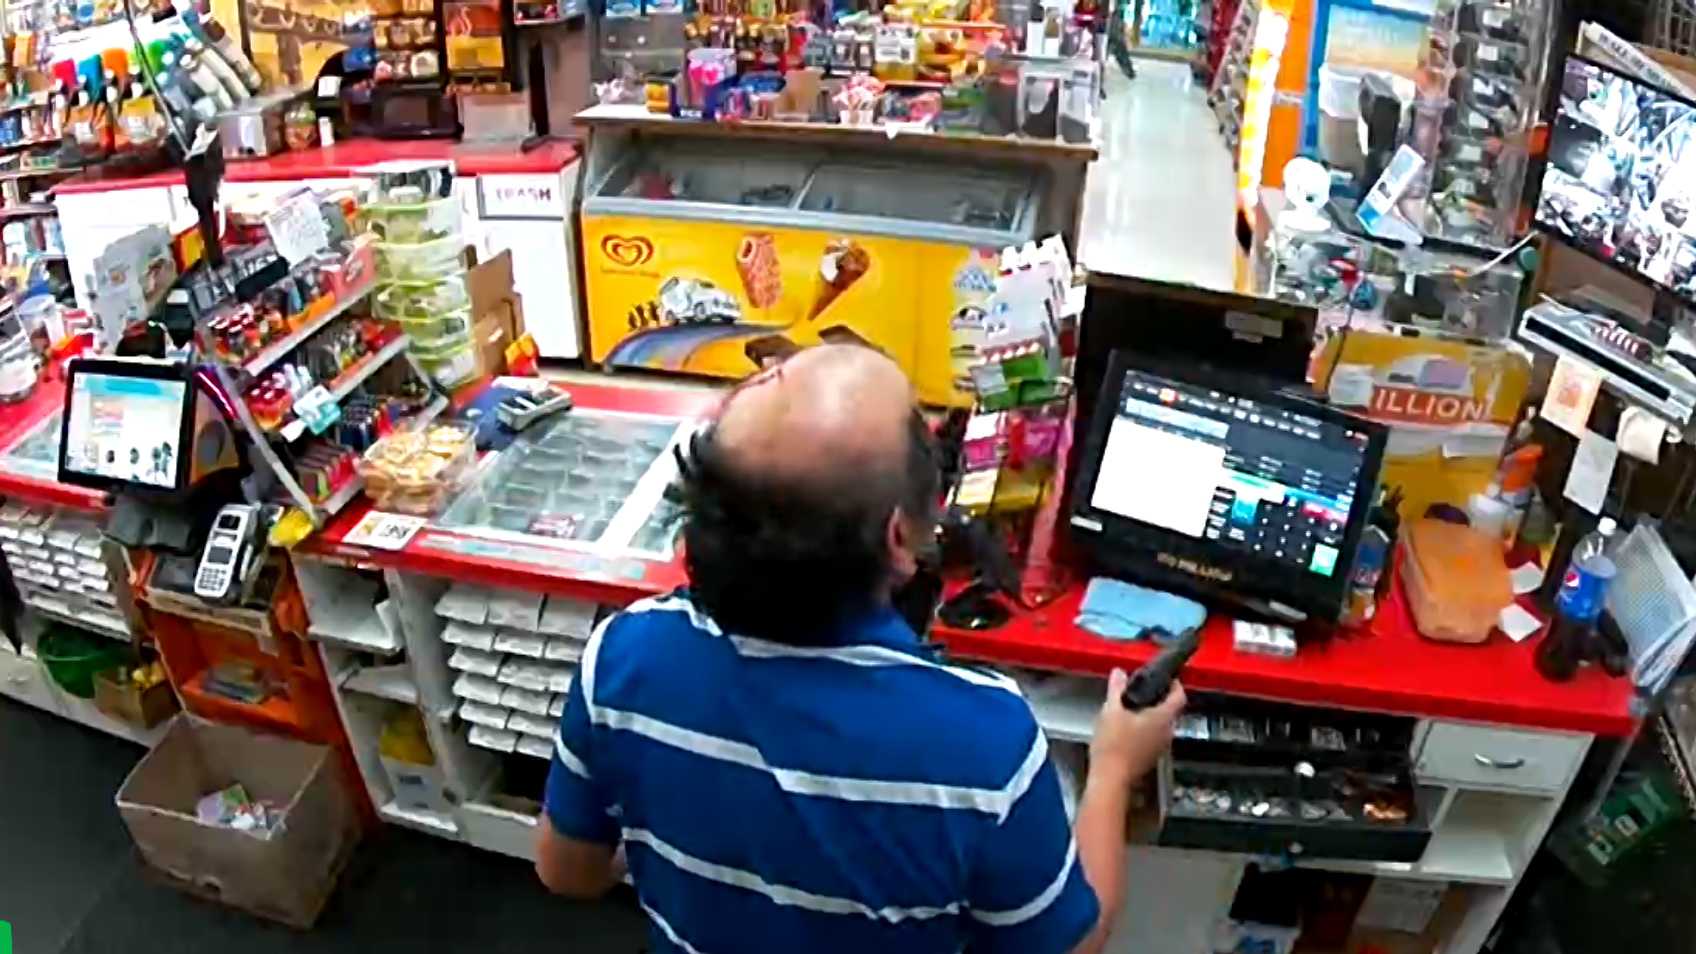 Video captures store clerk thwarting armed robbery in Fountain Valley